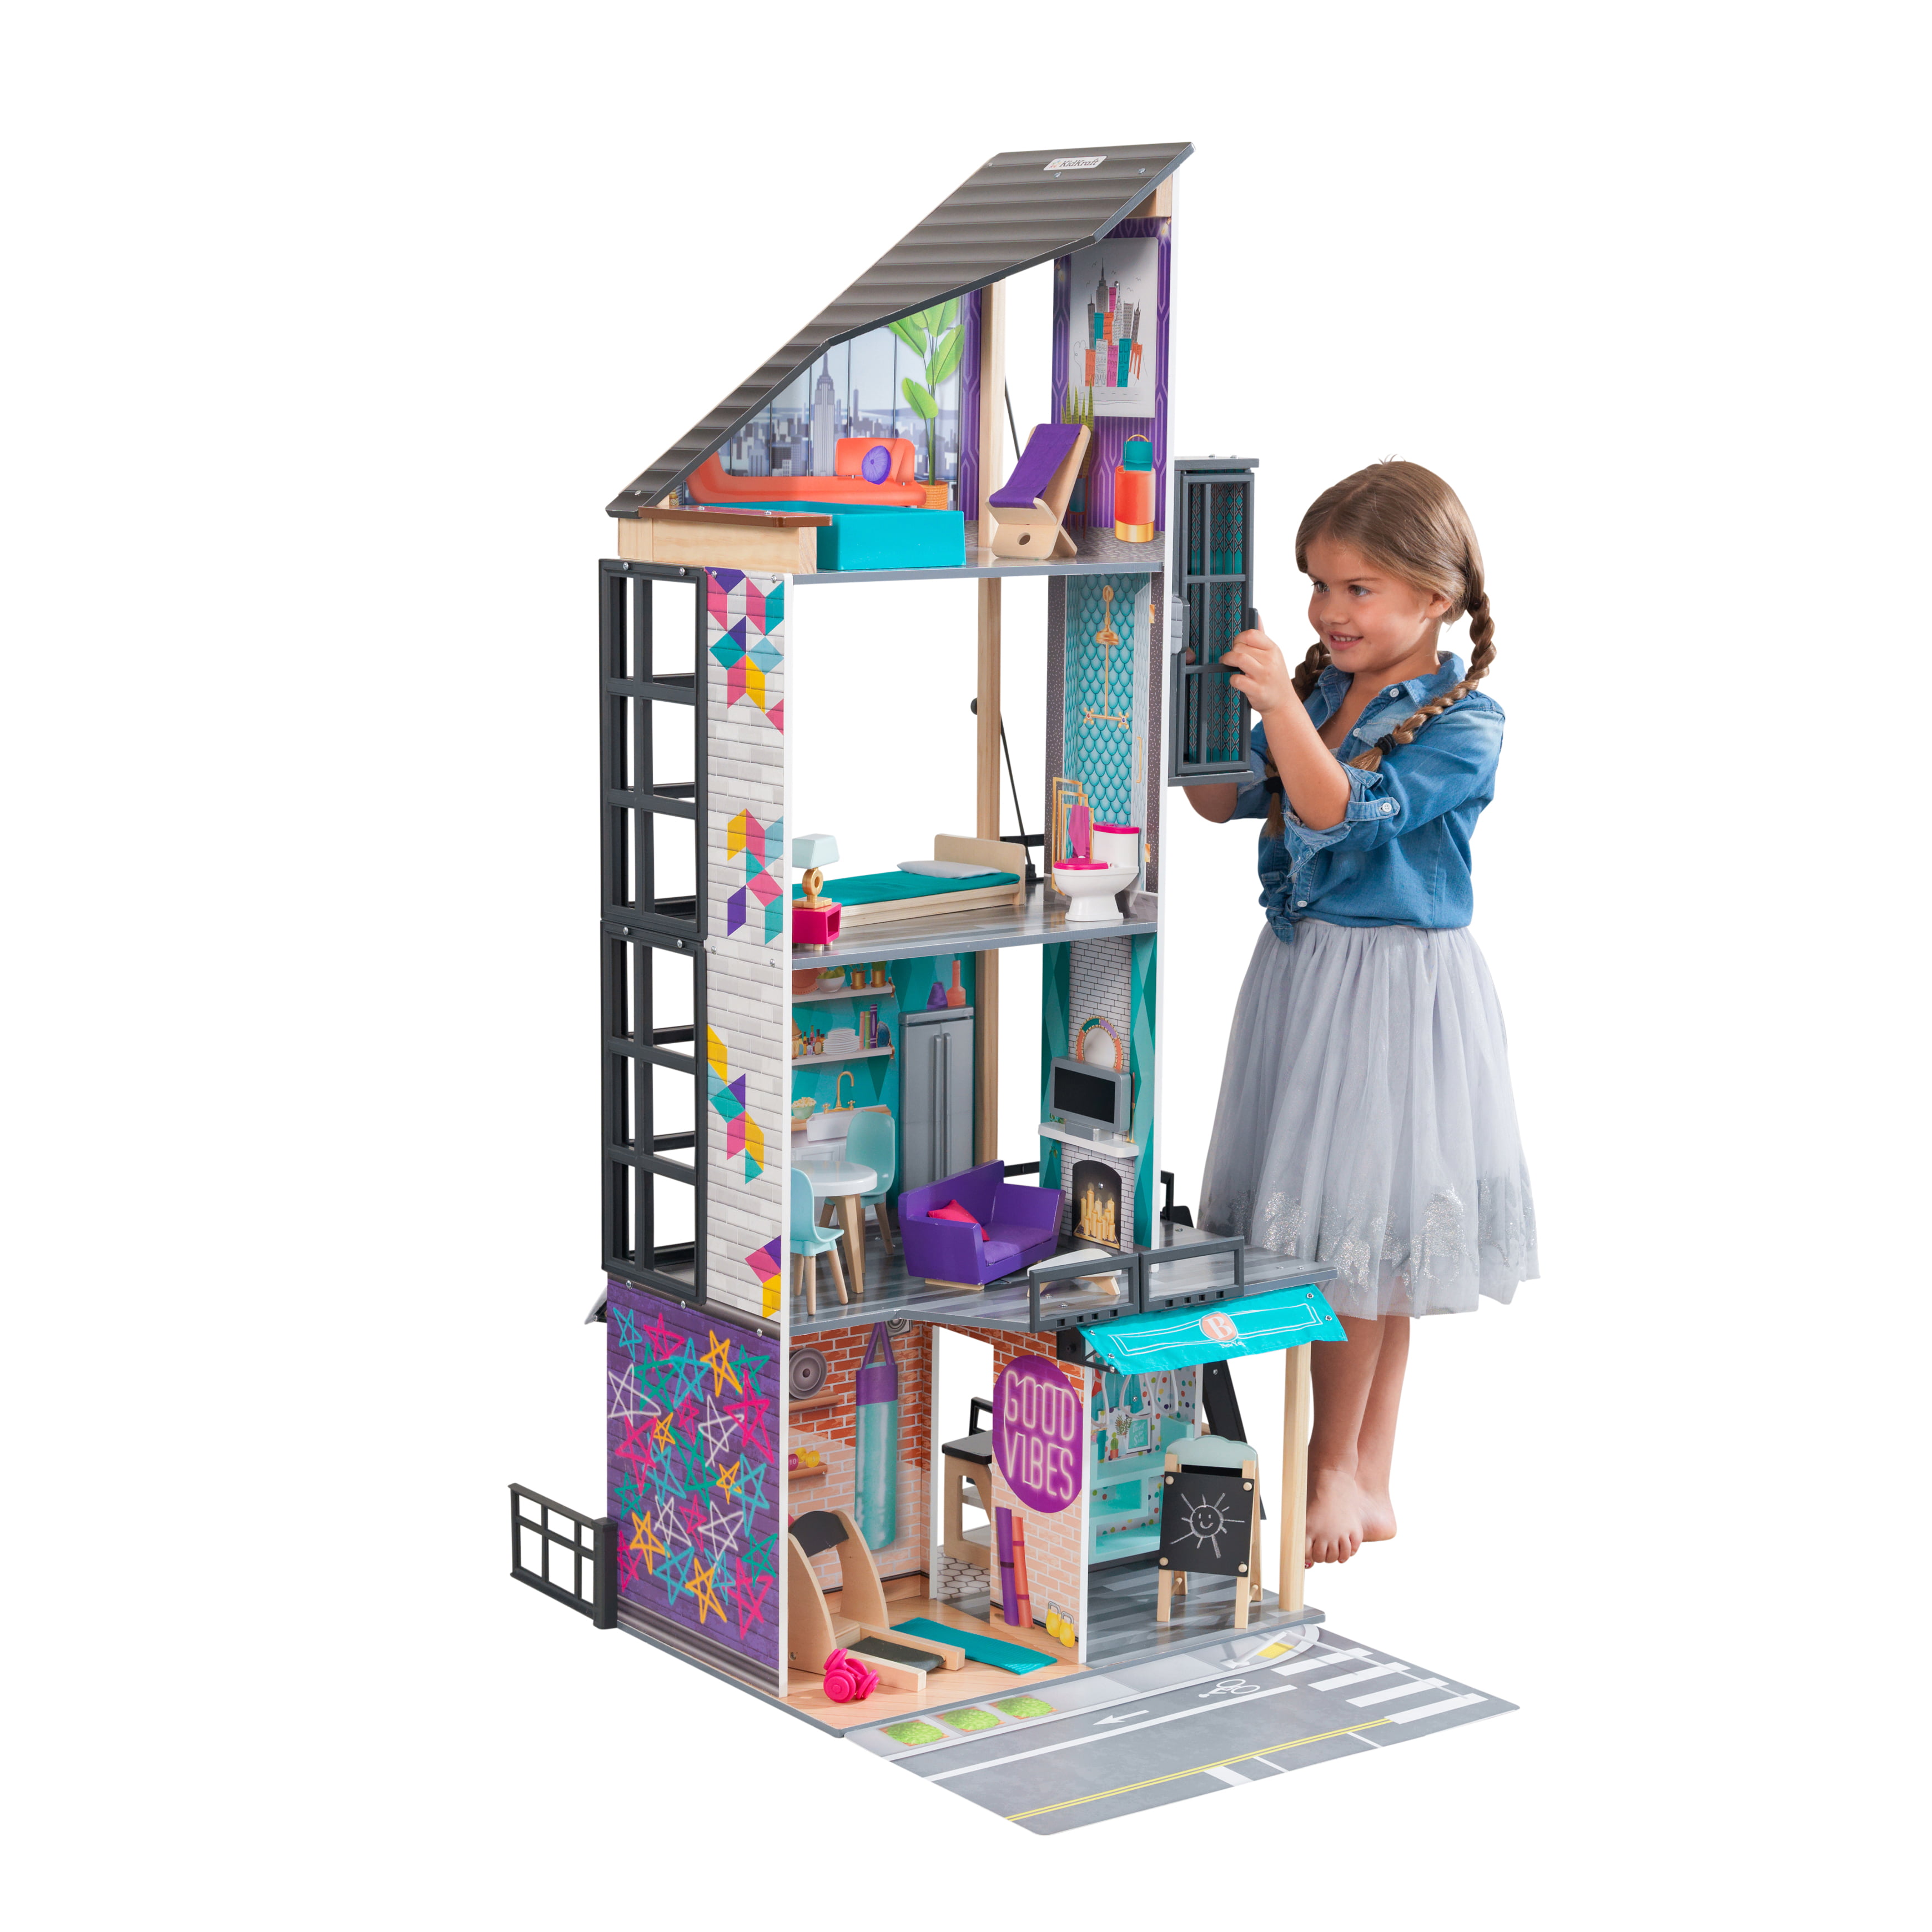 kidkraft majestic mansion dollhouse with 34 accessories